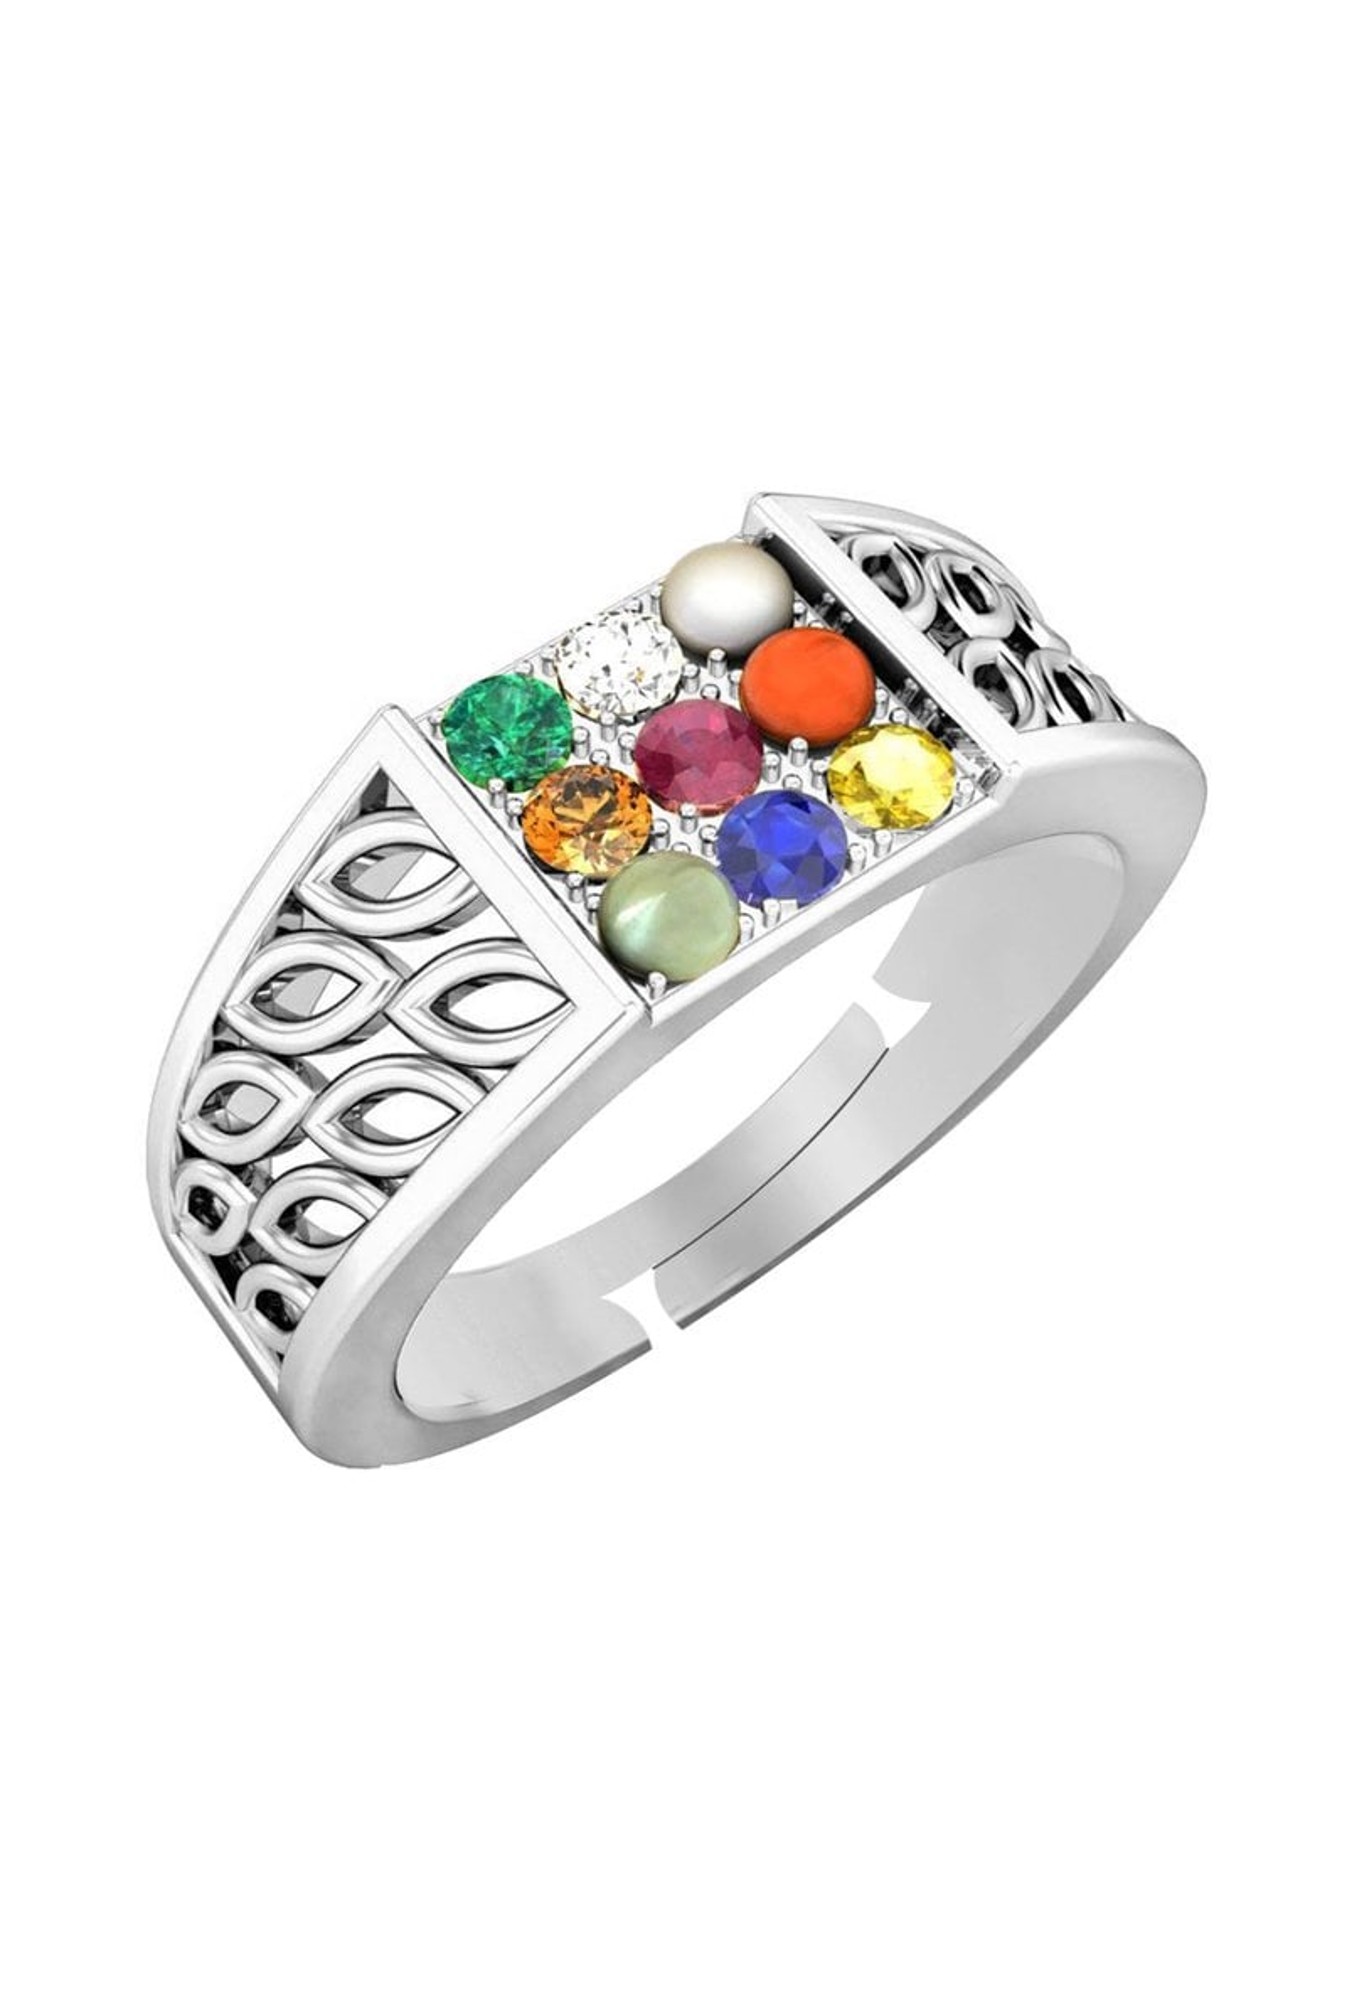 Red & Green Glass Statement Ring in Sterling Silver – Gem Set Love